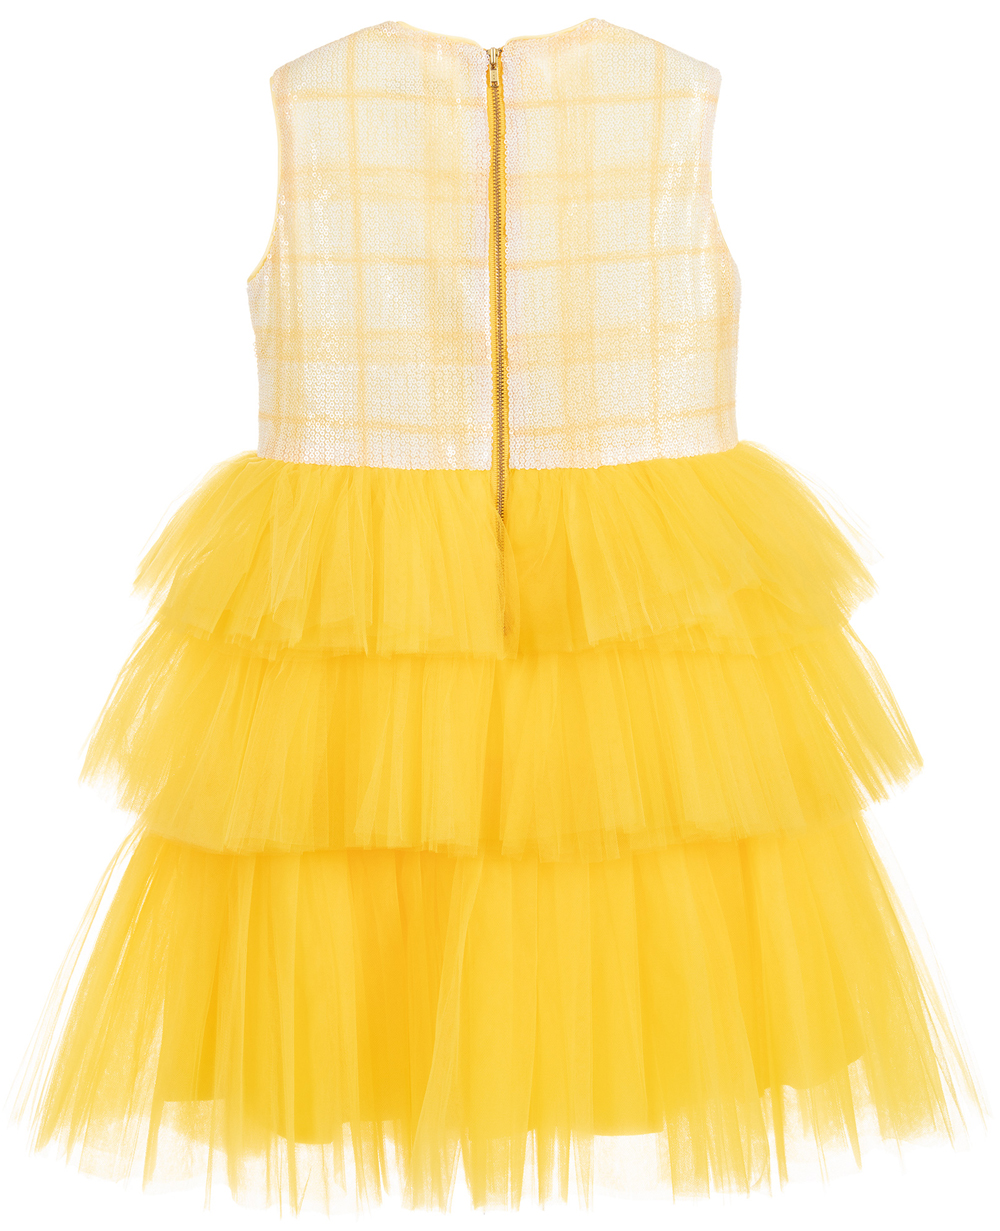 White & Yellow Layered Sleeveless Tulle Dress Sequin Party Dress